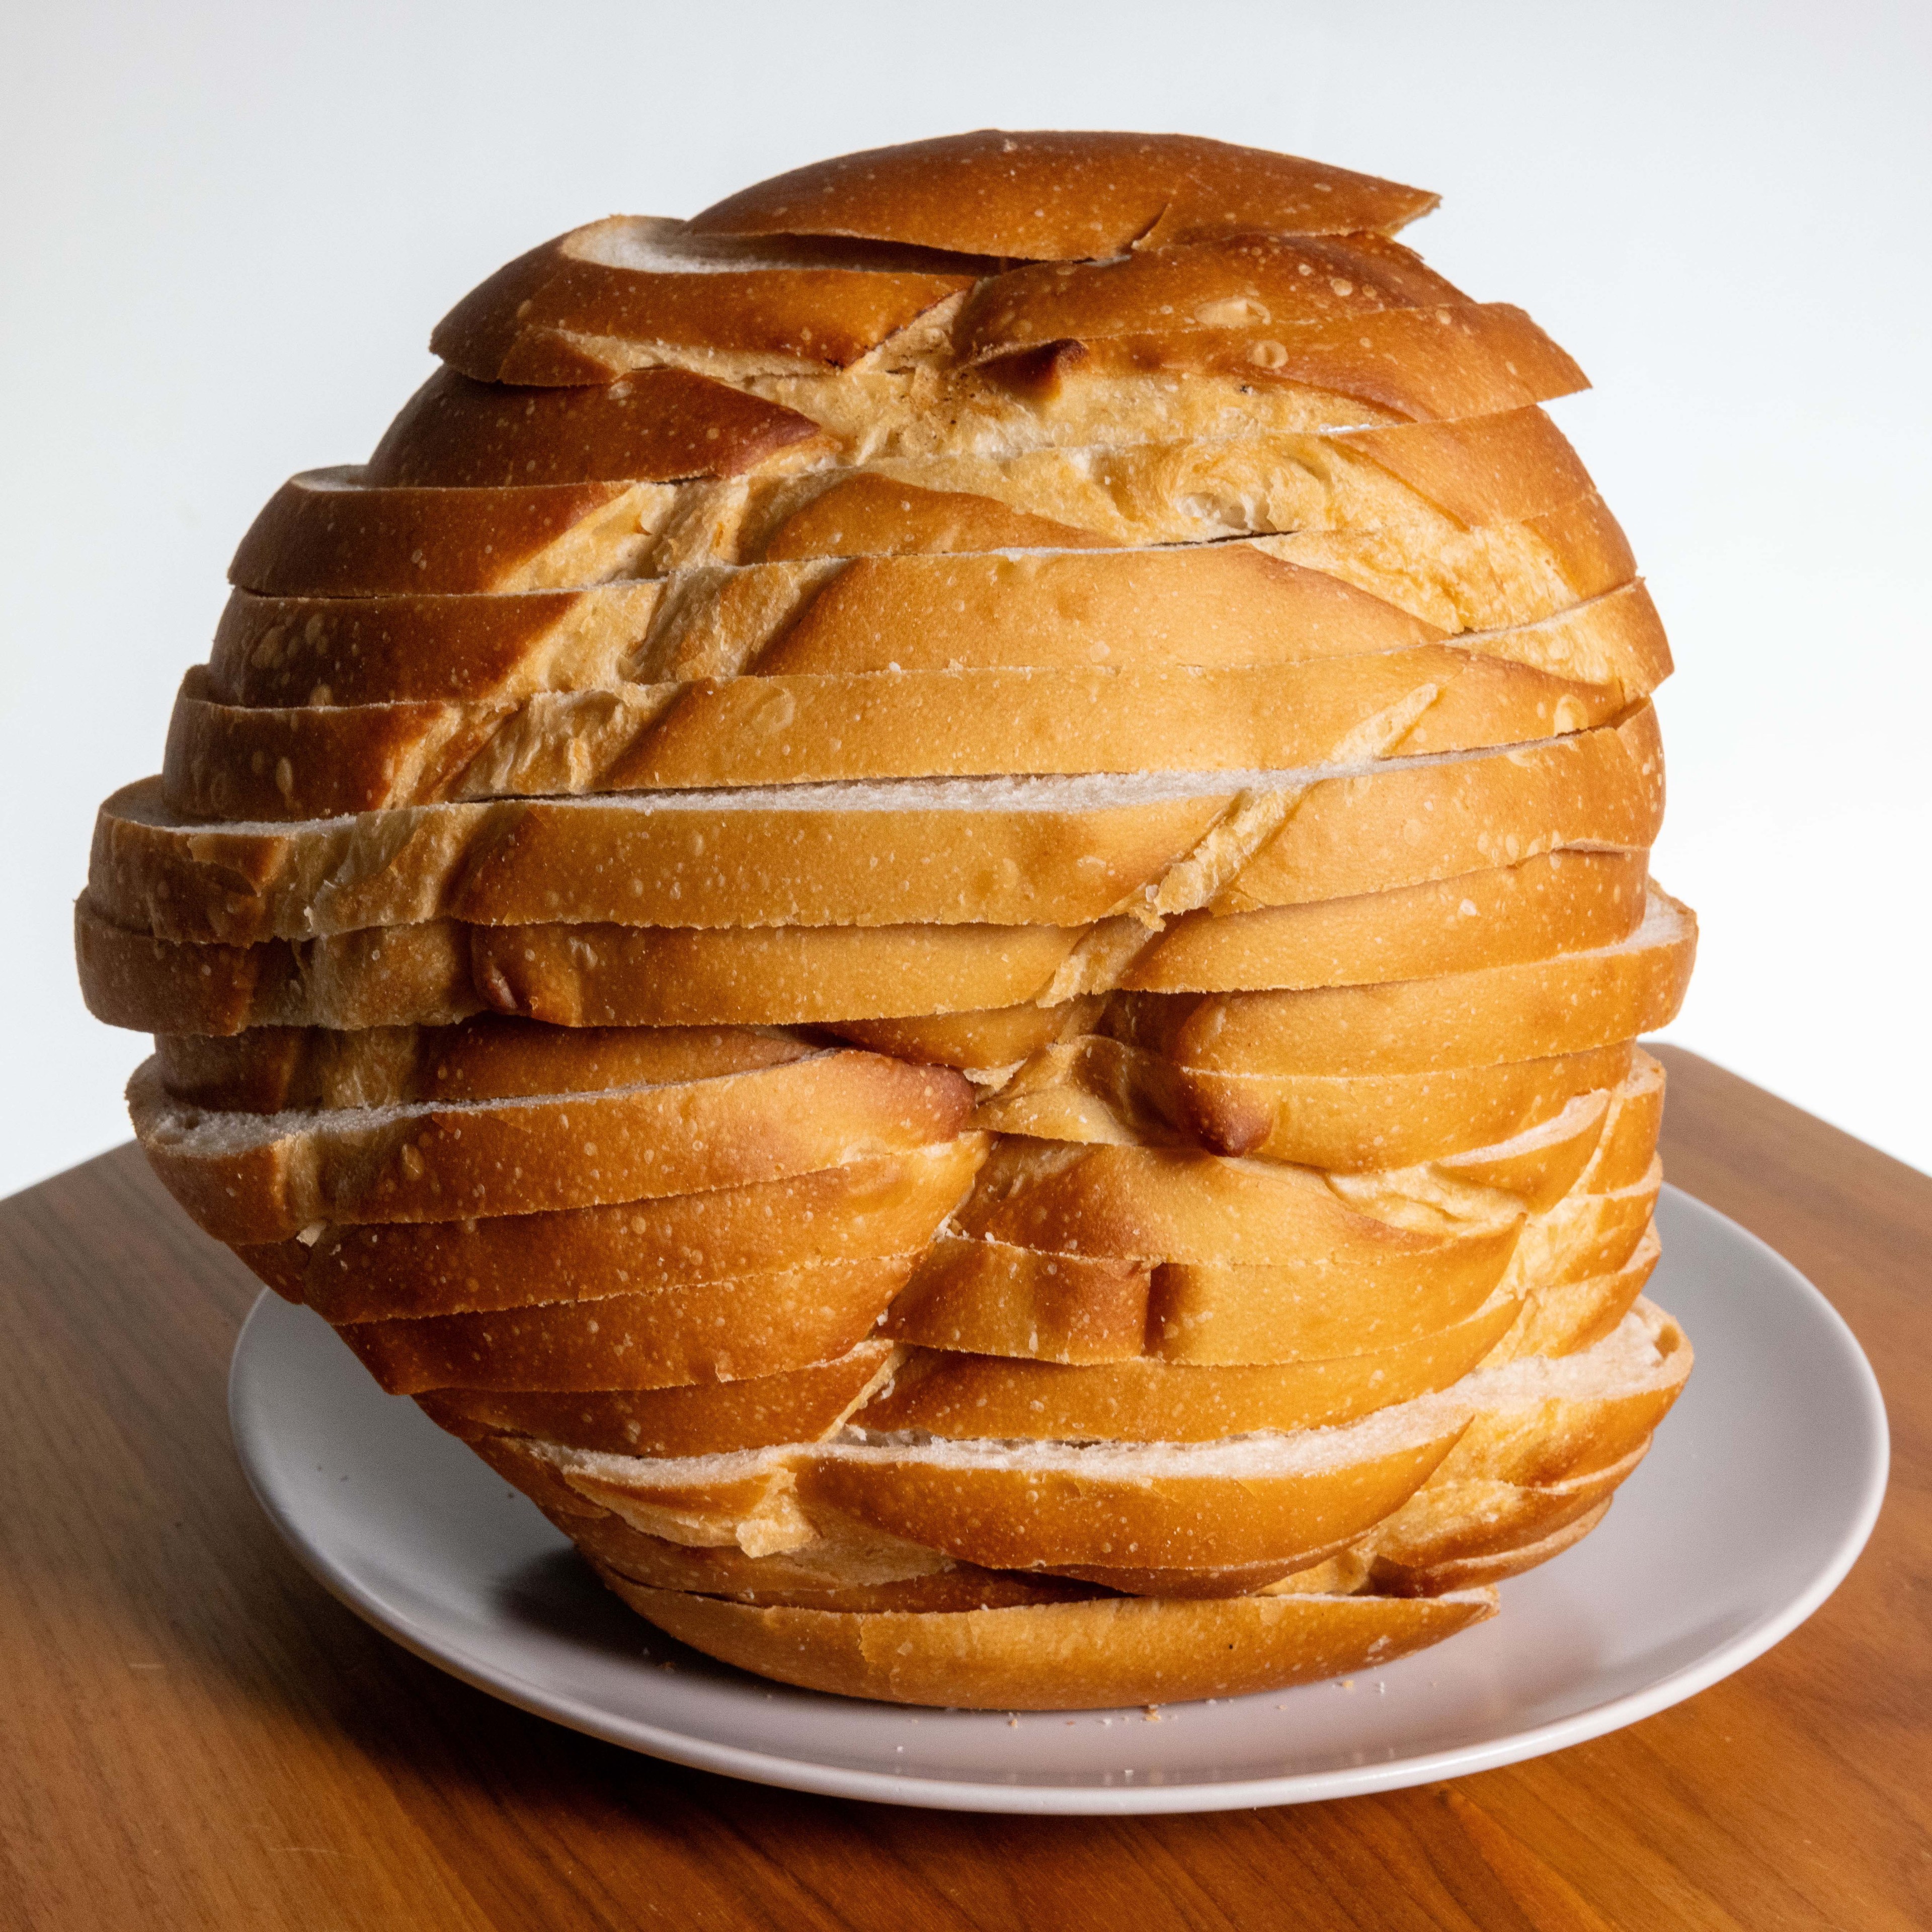 The image depicts a loaf of bread sliced and reassembled into a spherical shape, placed on a white plate on a wooden table, with a plain white background.